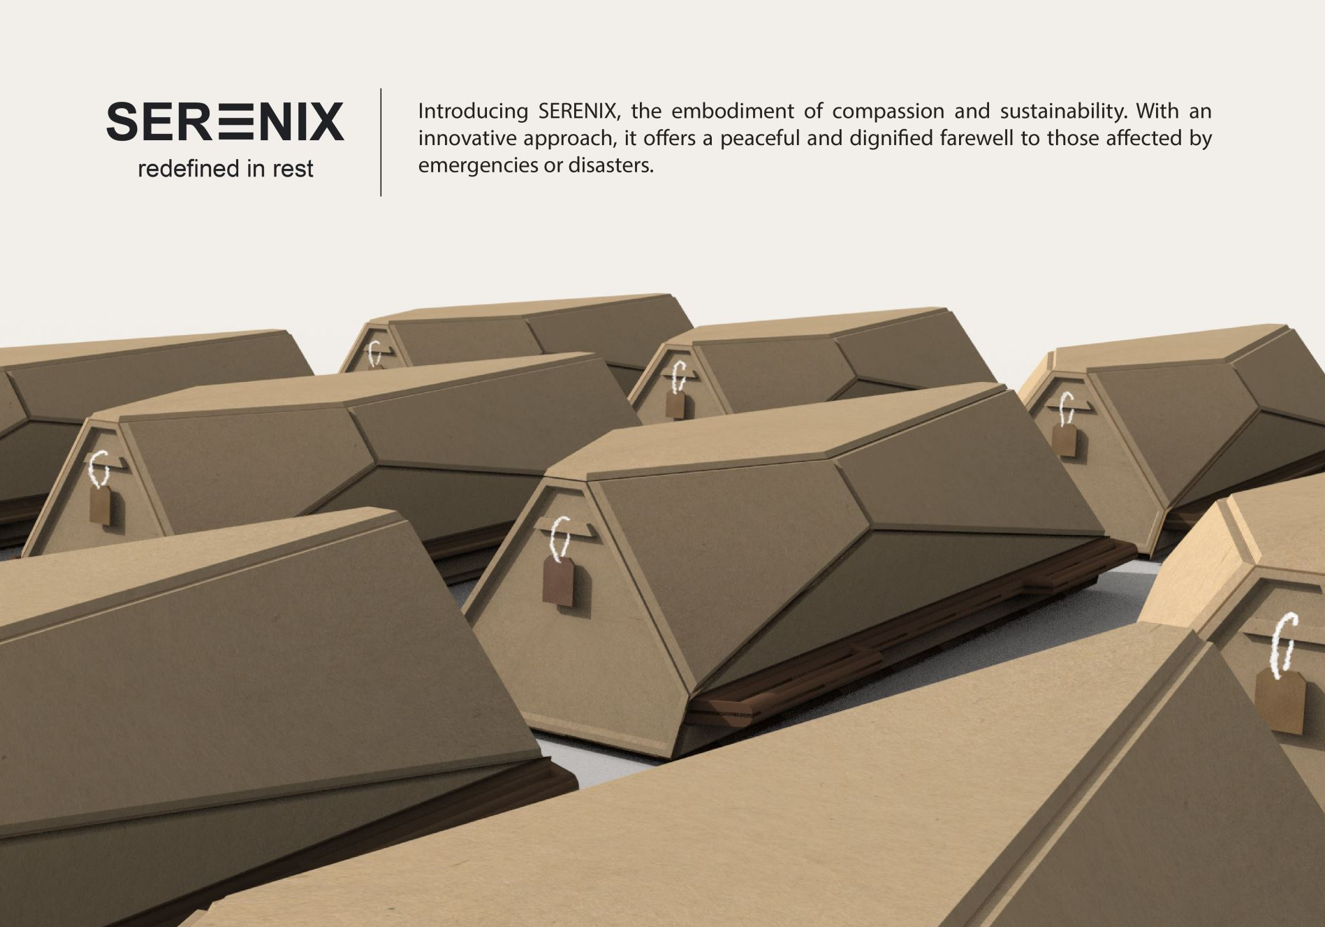 A group of cardboard boxes with tags

Description automatically generated